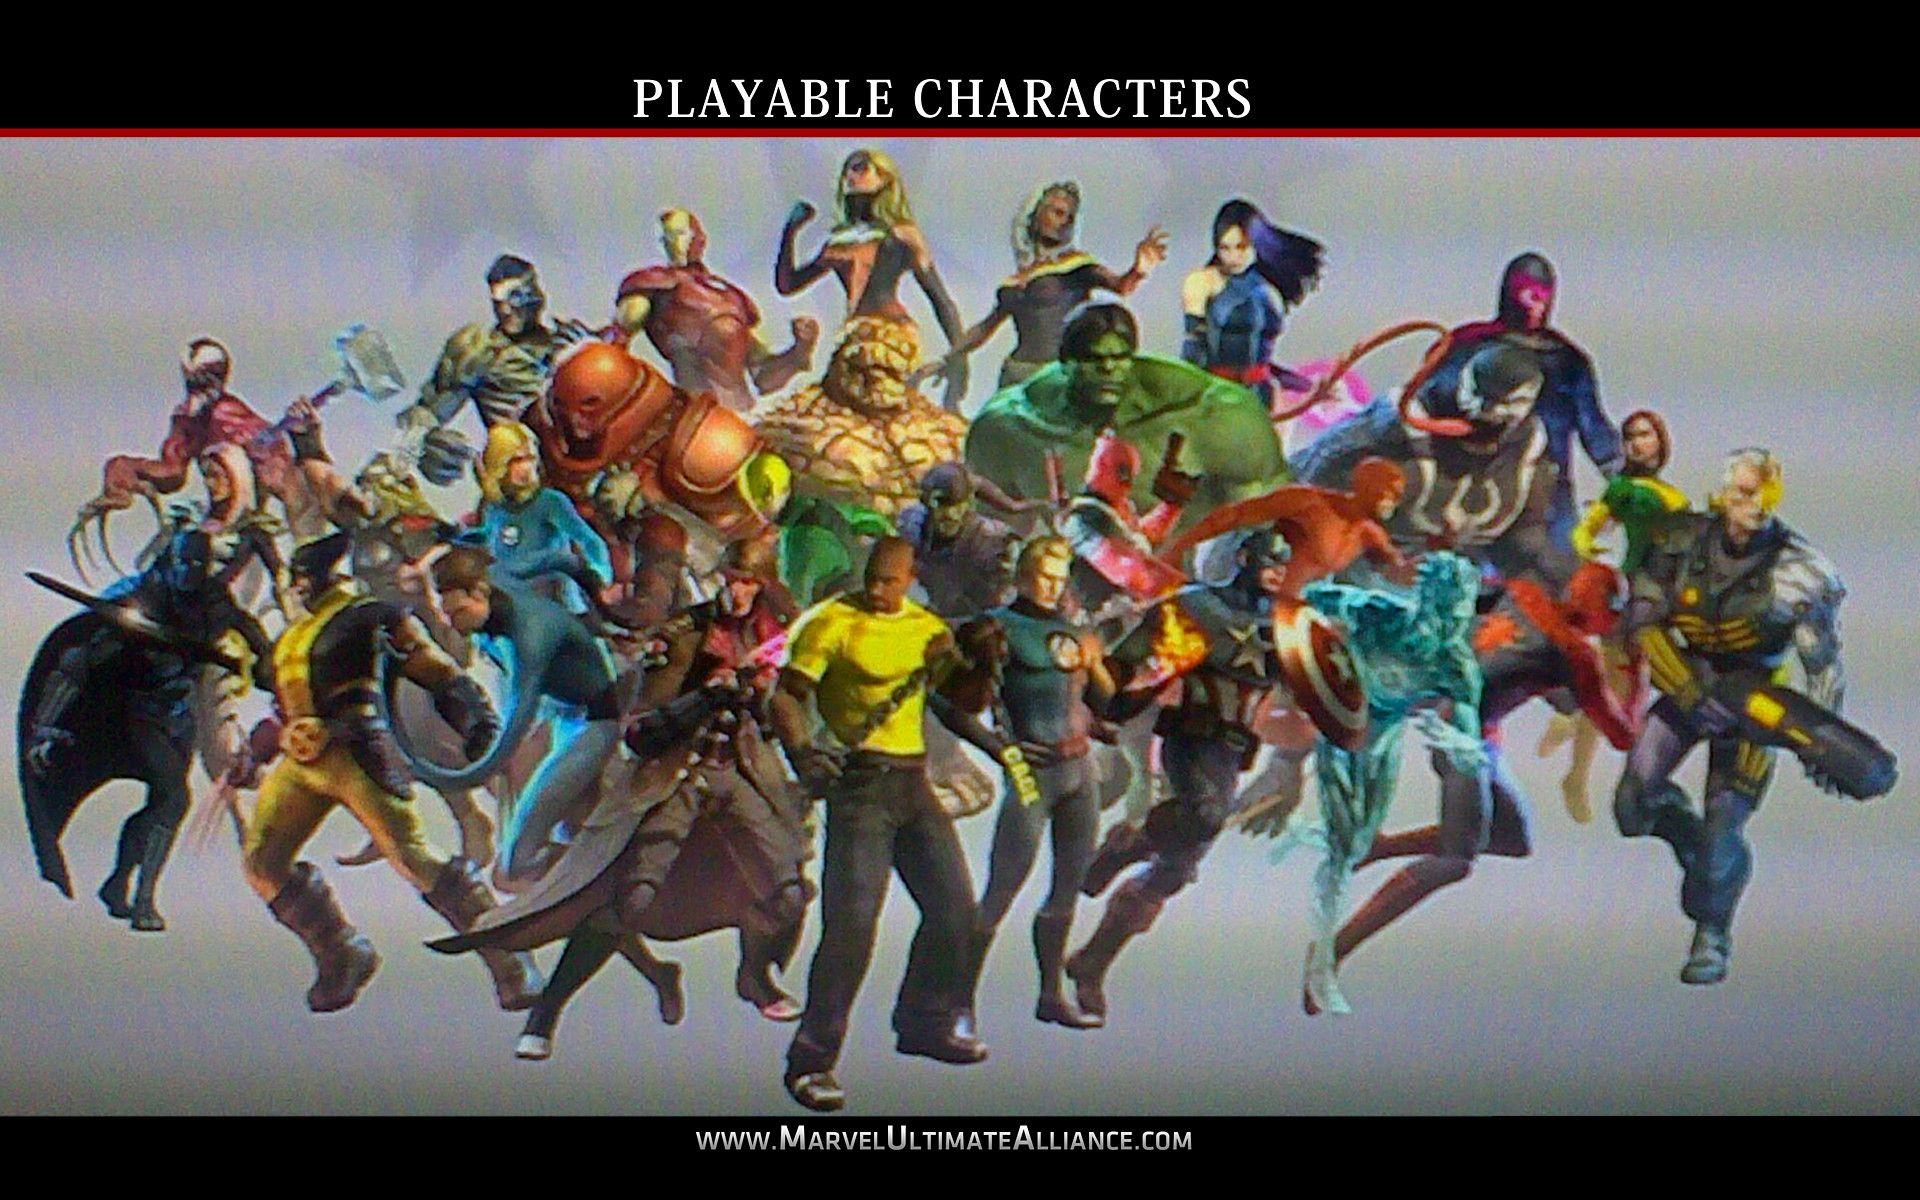 Marvel ultimate alliance 2 characters unlock ps3